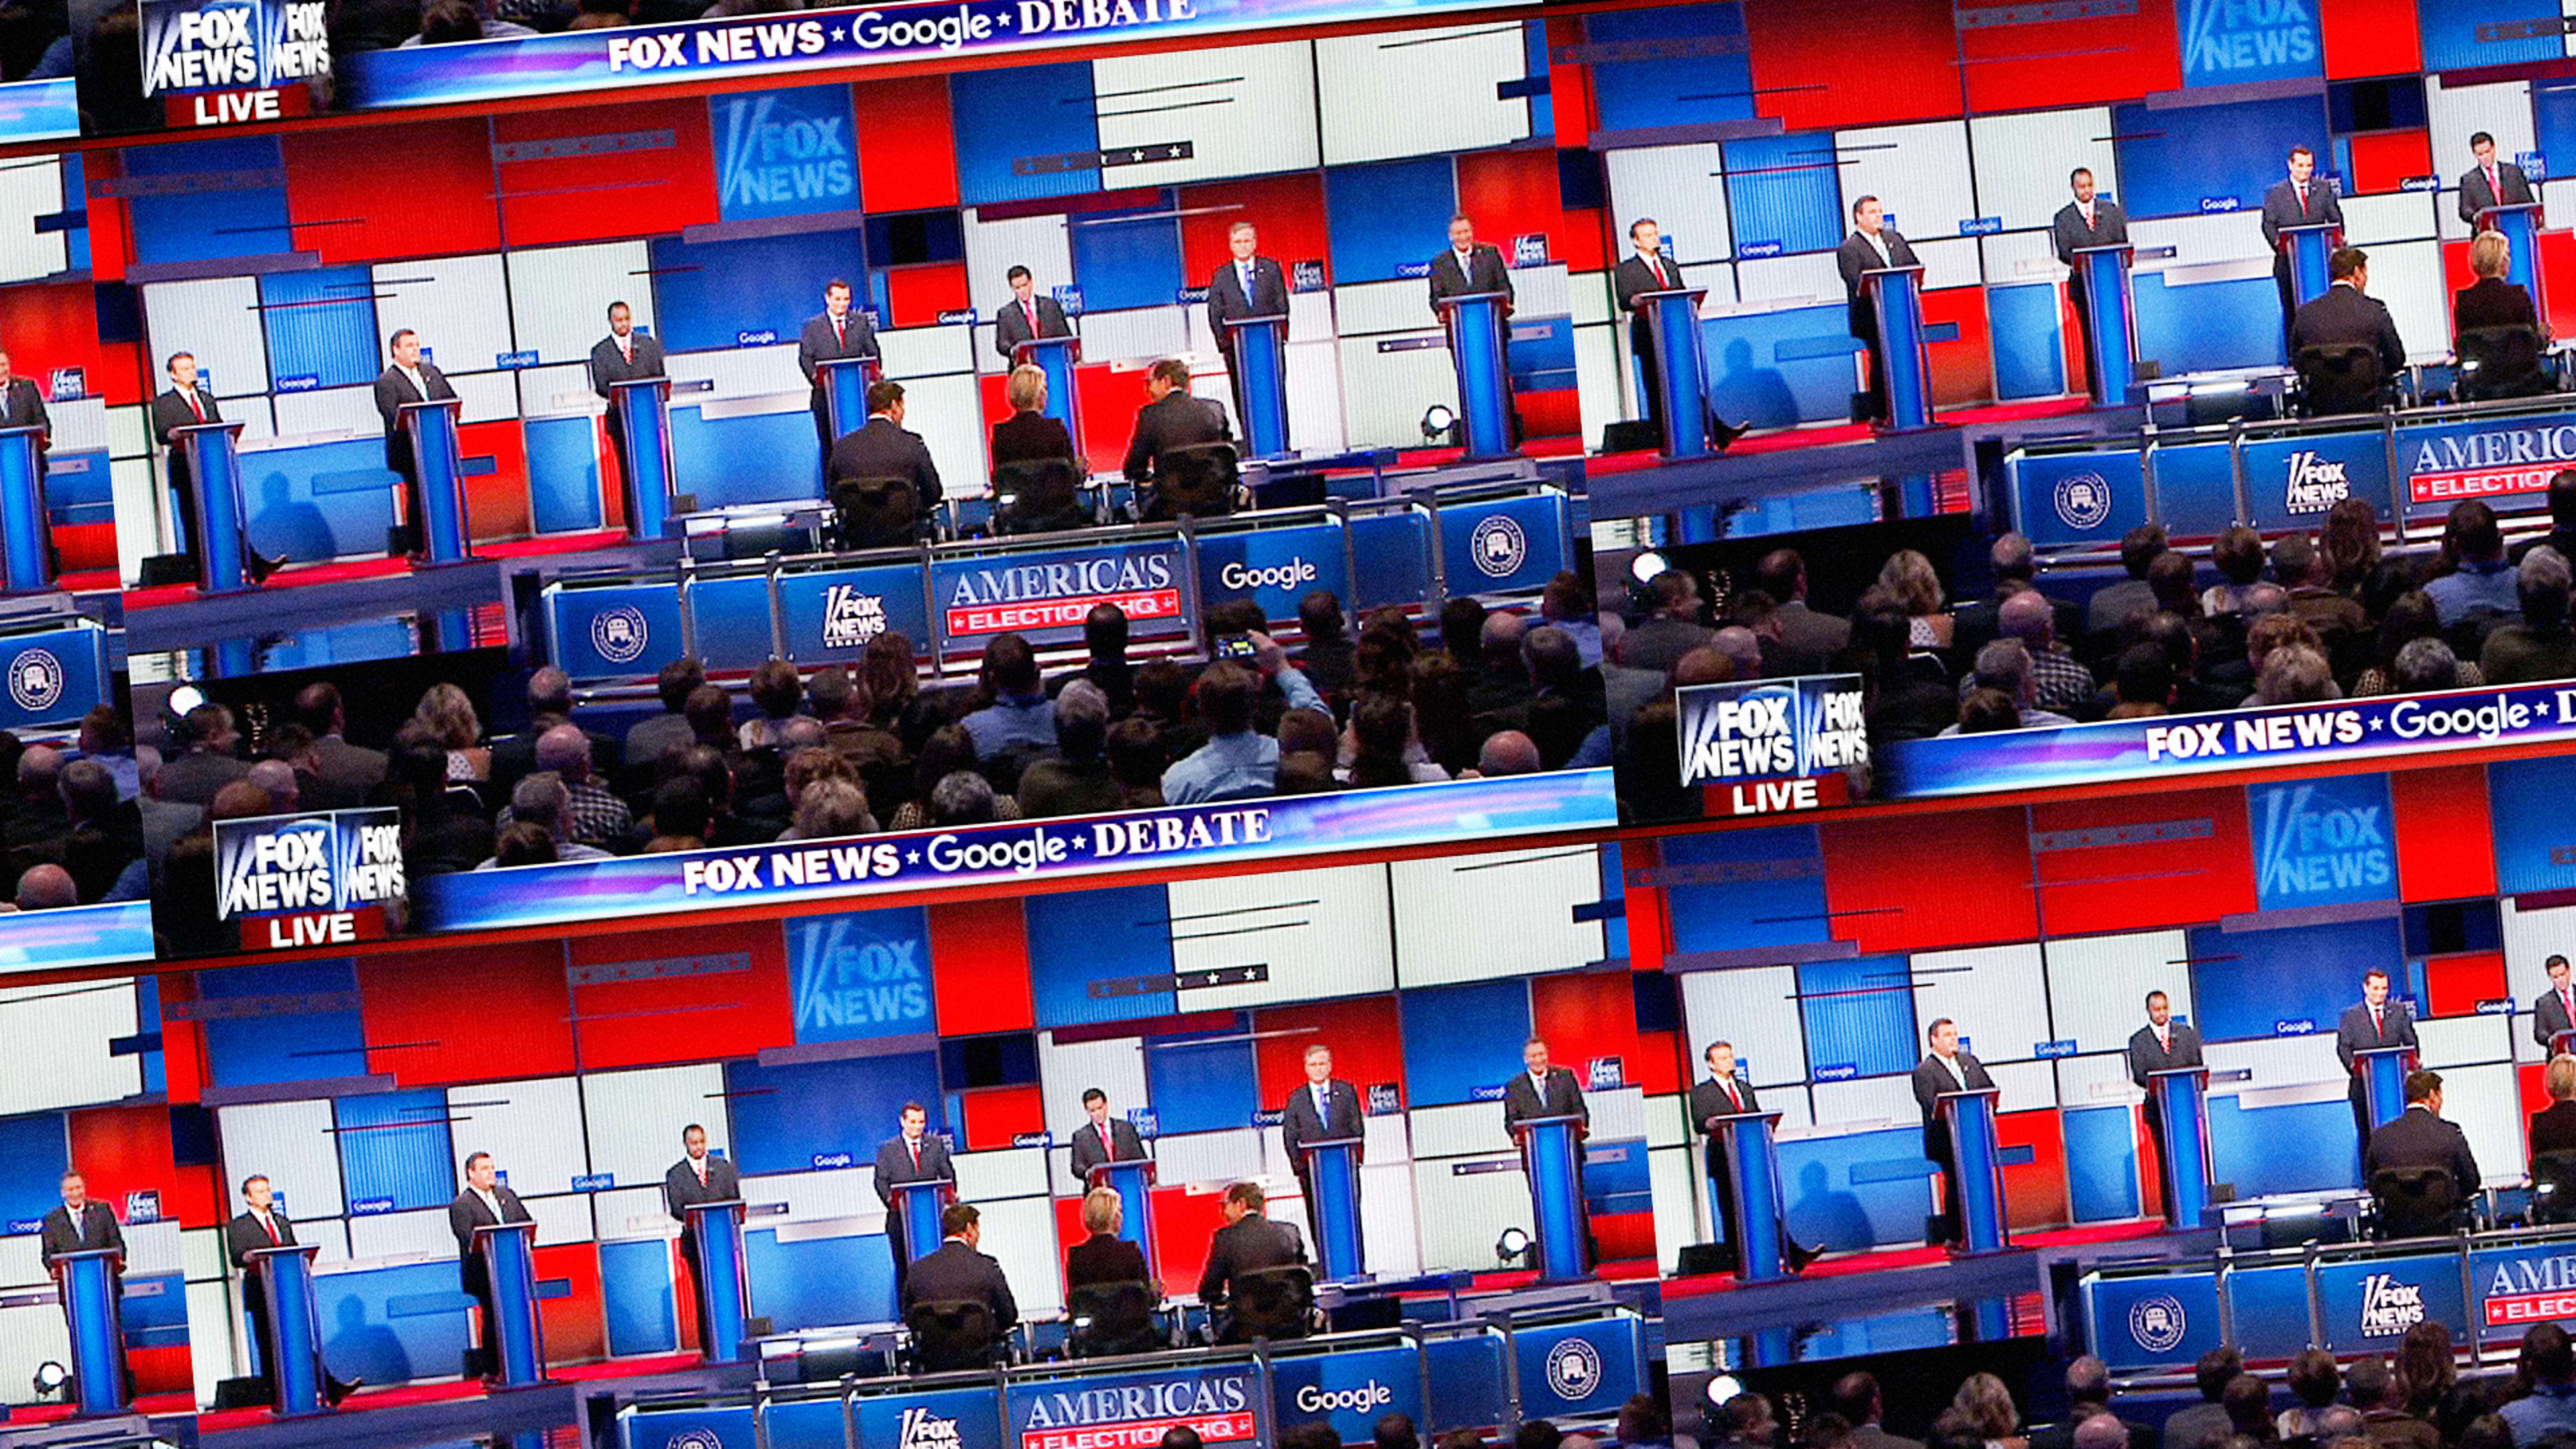 Who Won The Trump-Less Debate? The Viewers And Megyn Kelly, But Not Cruz